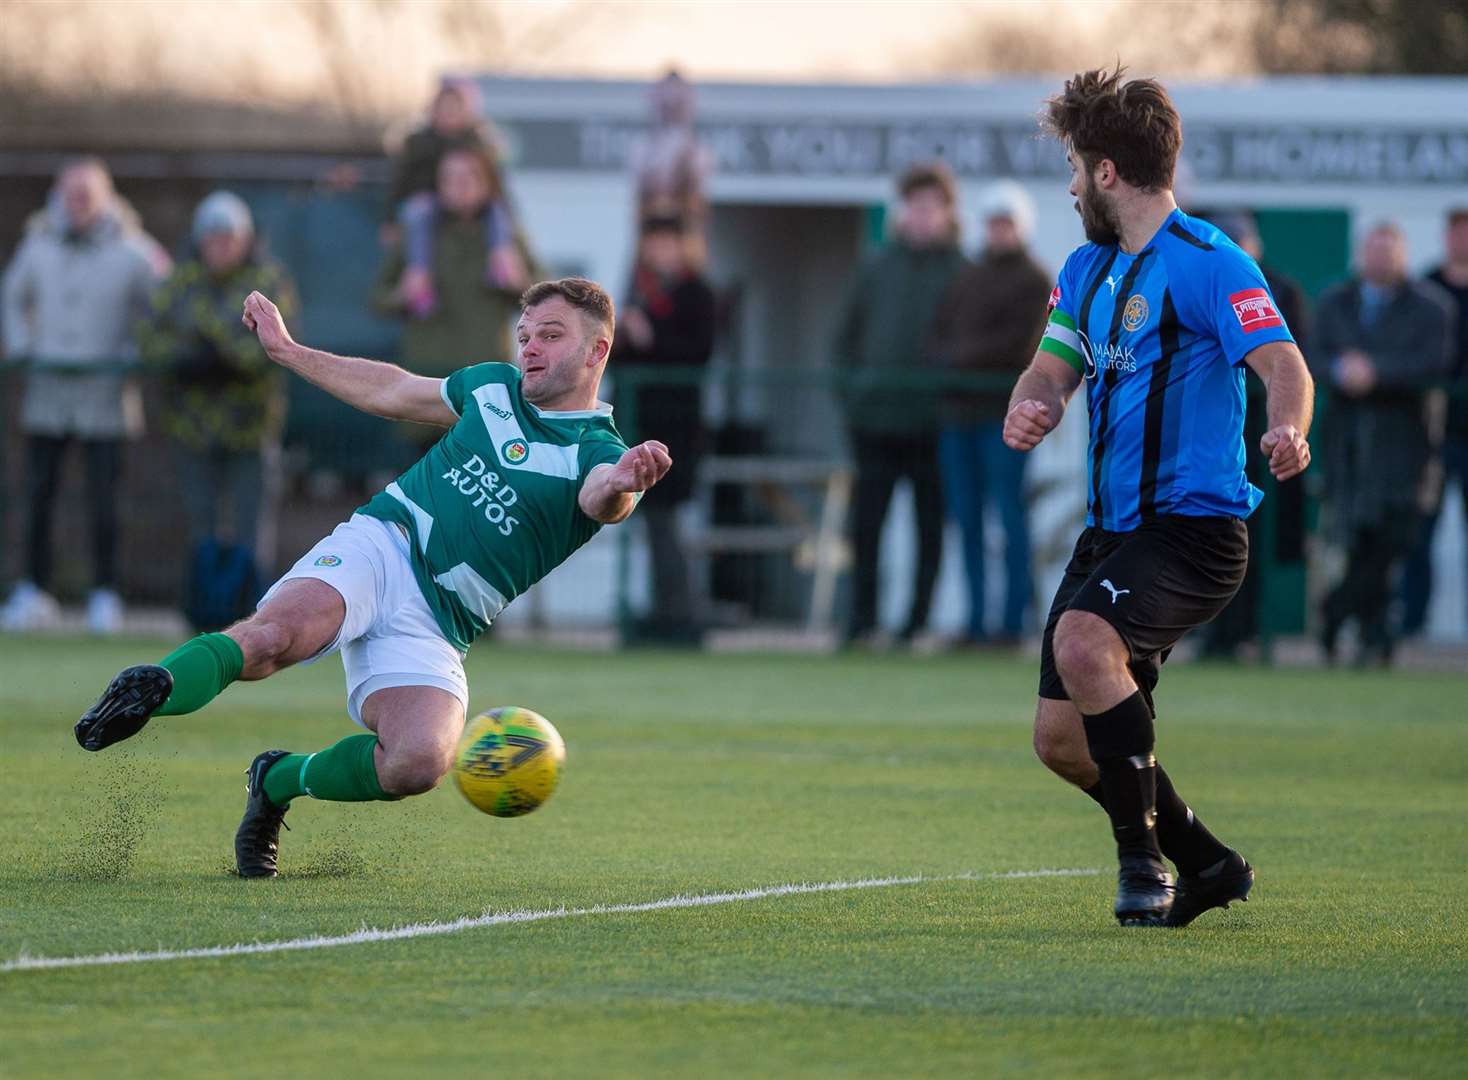 Ashford striker Gary Lockyer completes the scoring against Sevenoaks with his hat-trick goal Picture: Ian Scammell